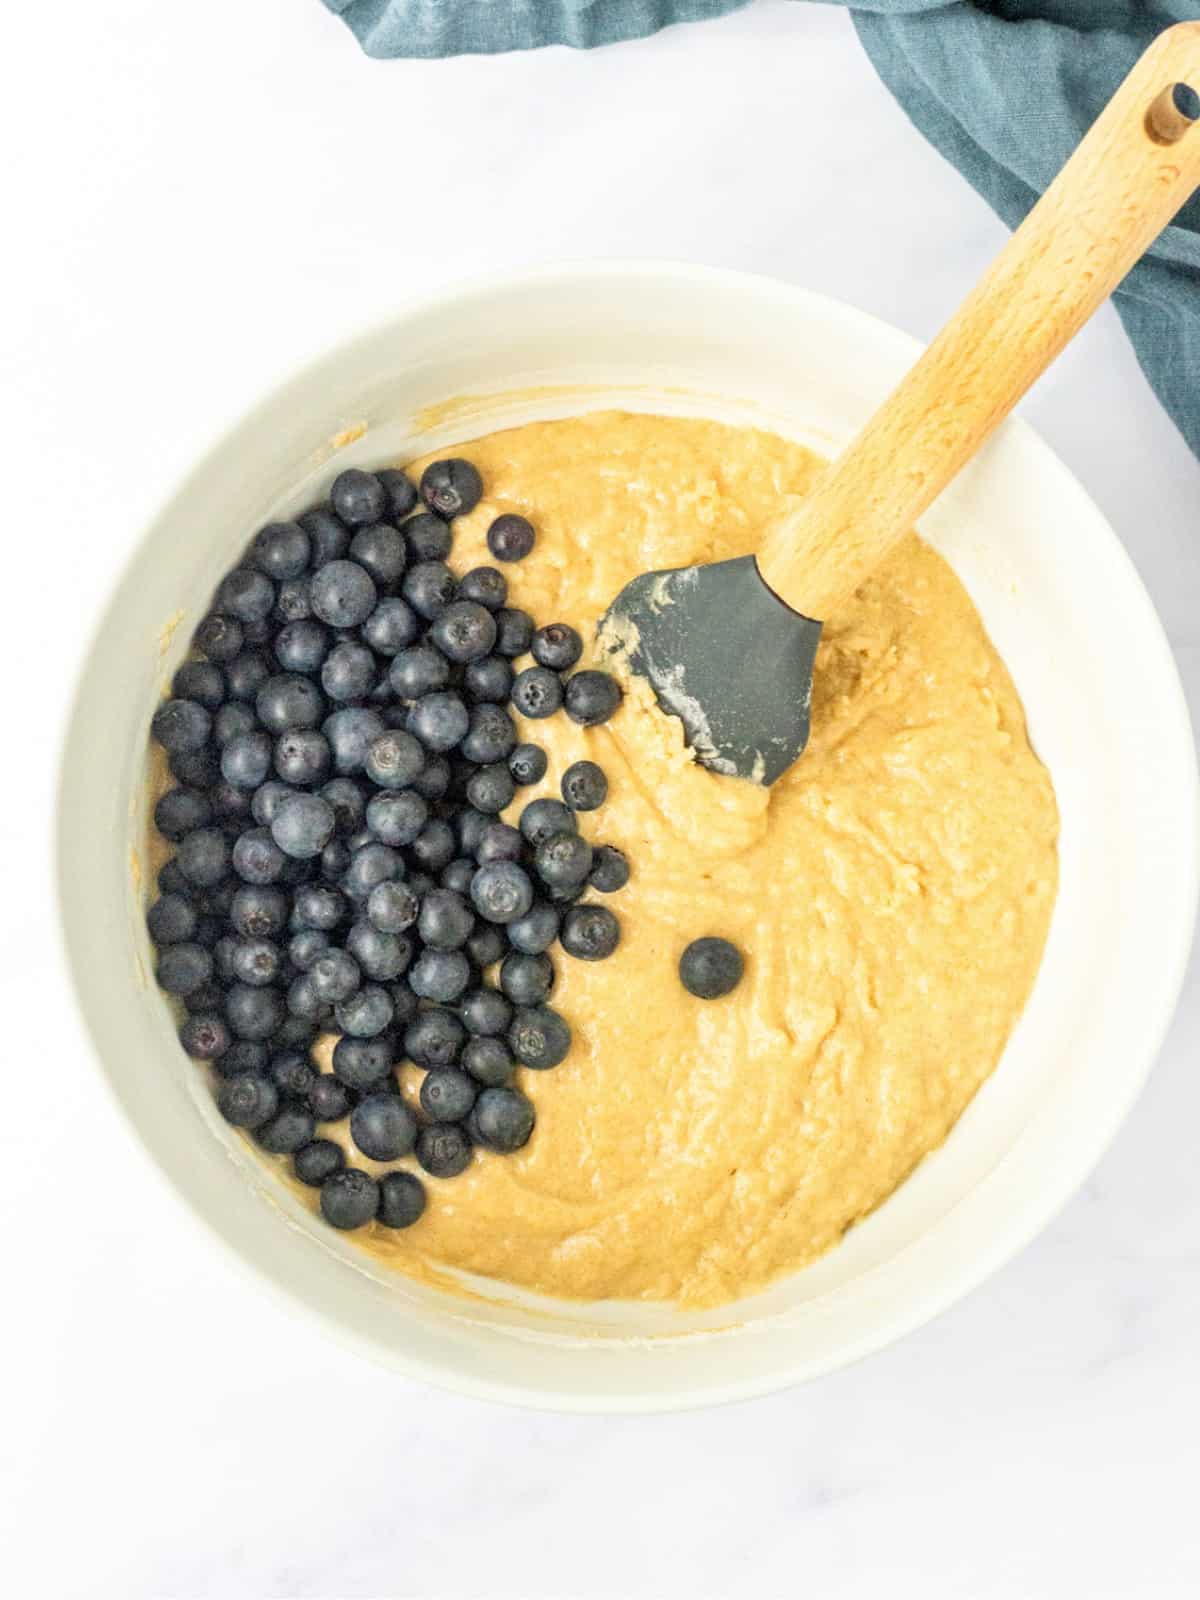 Blueberries on top of muffin batter in a bowl with a spatula.